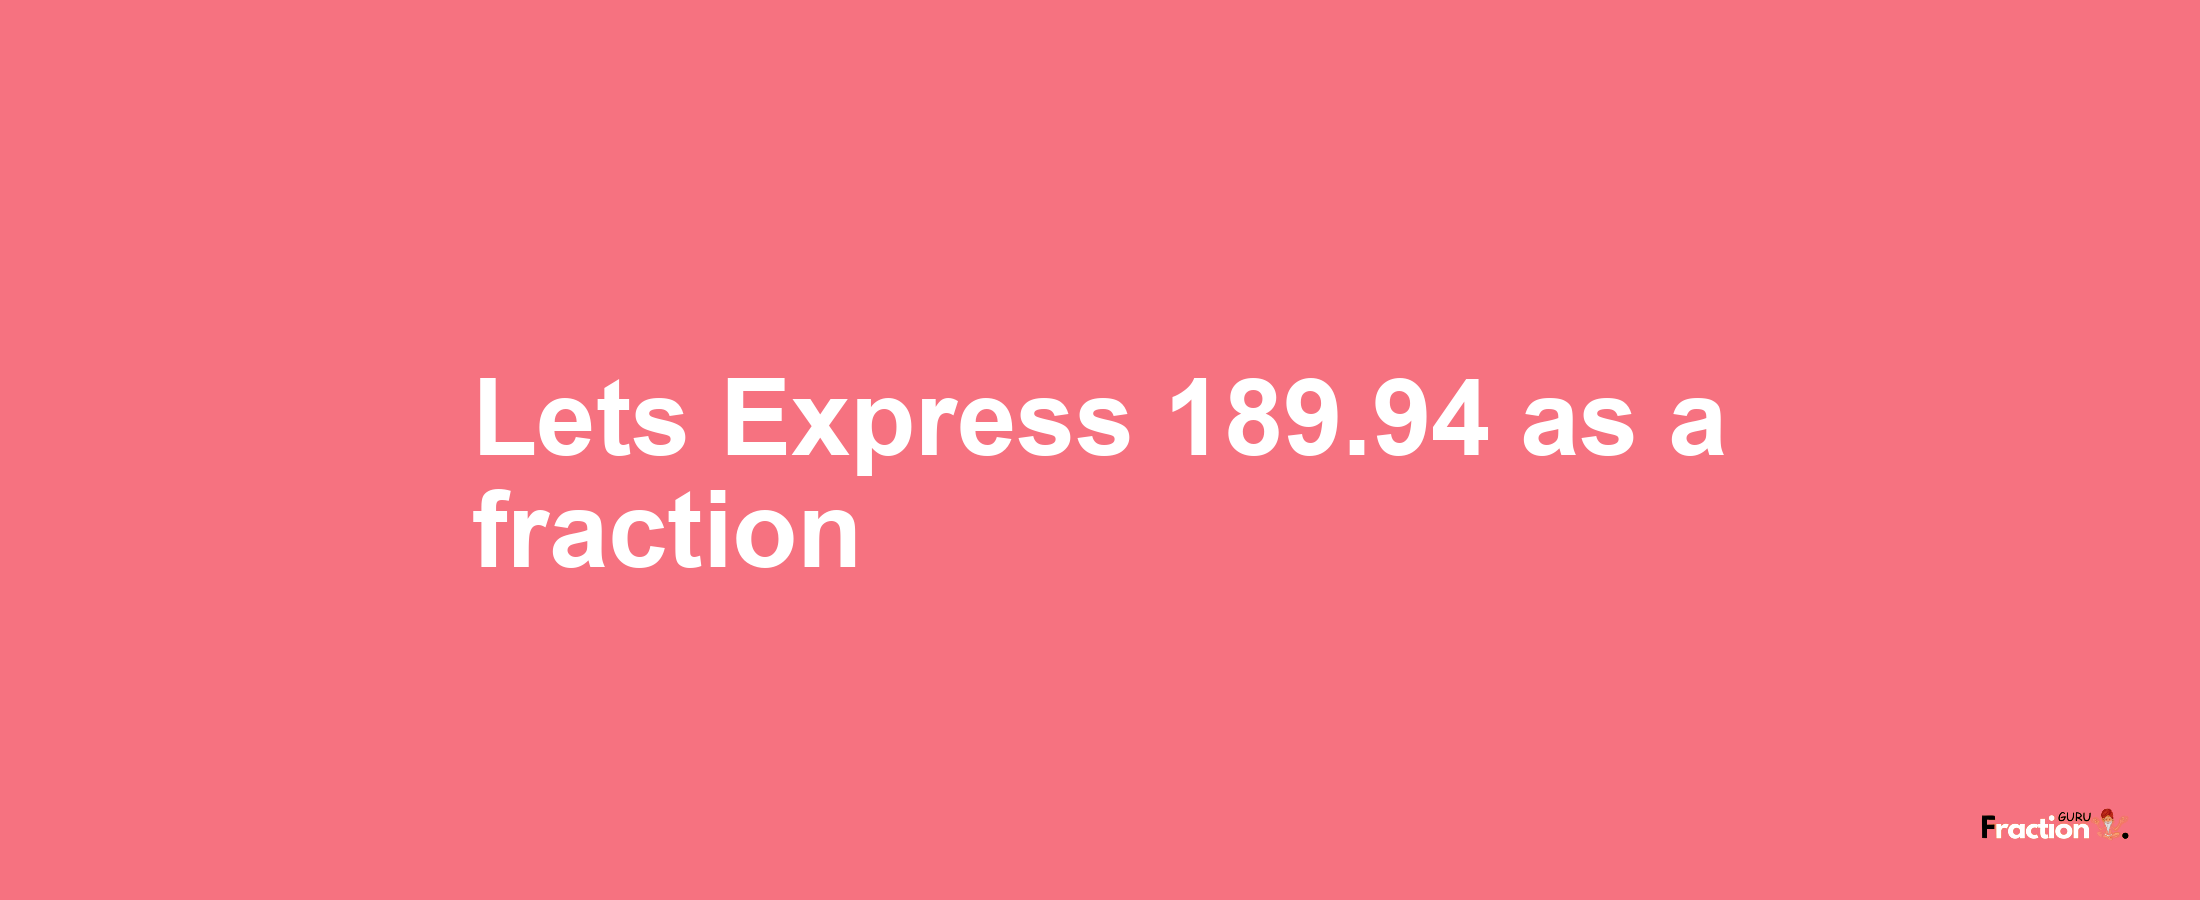 Lets Express 189.94 as afraction